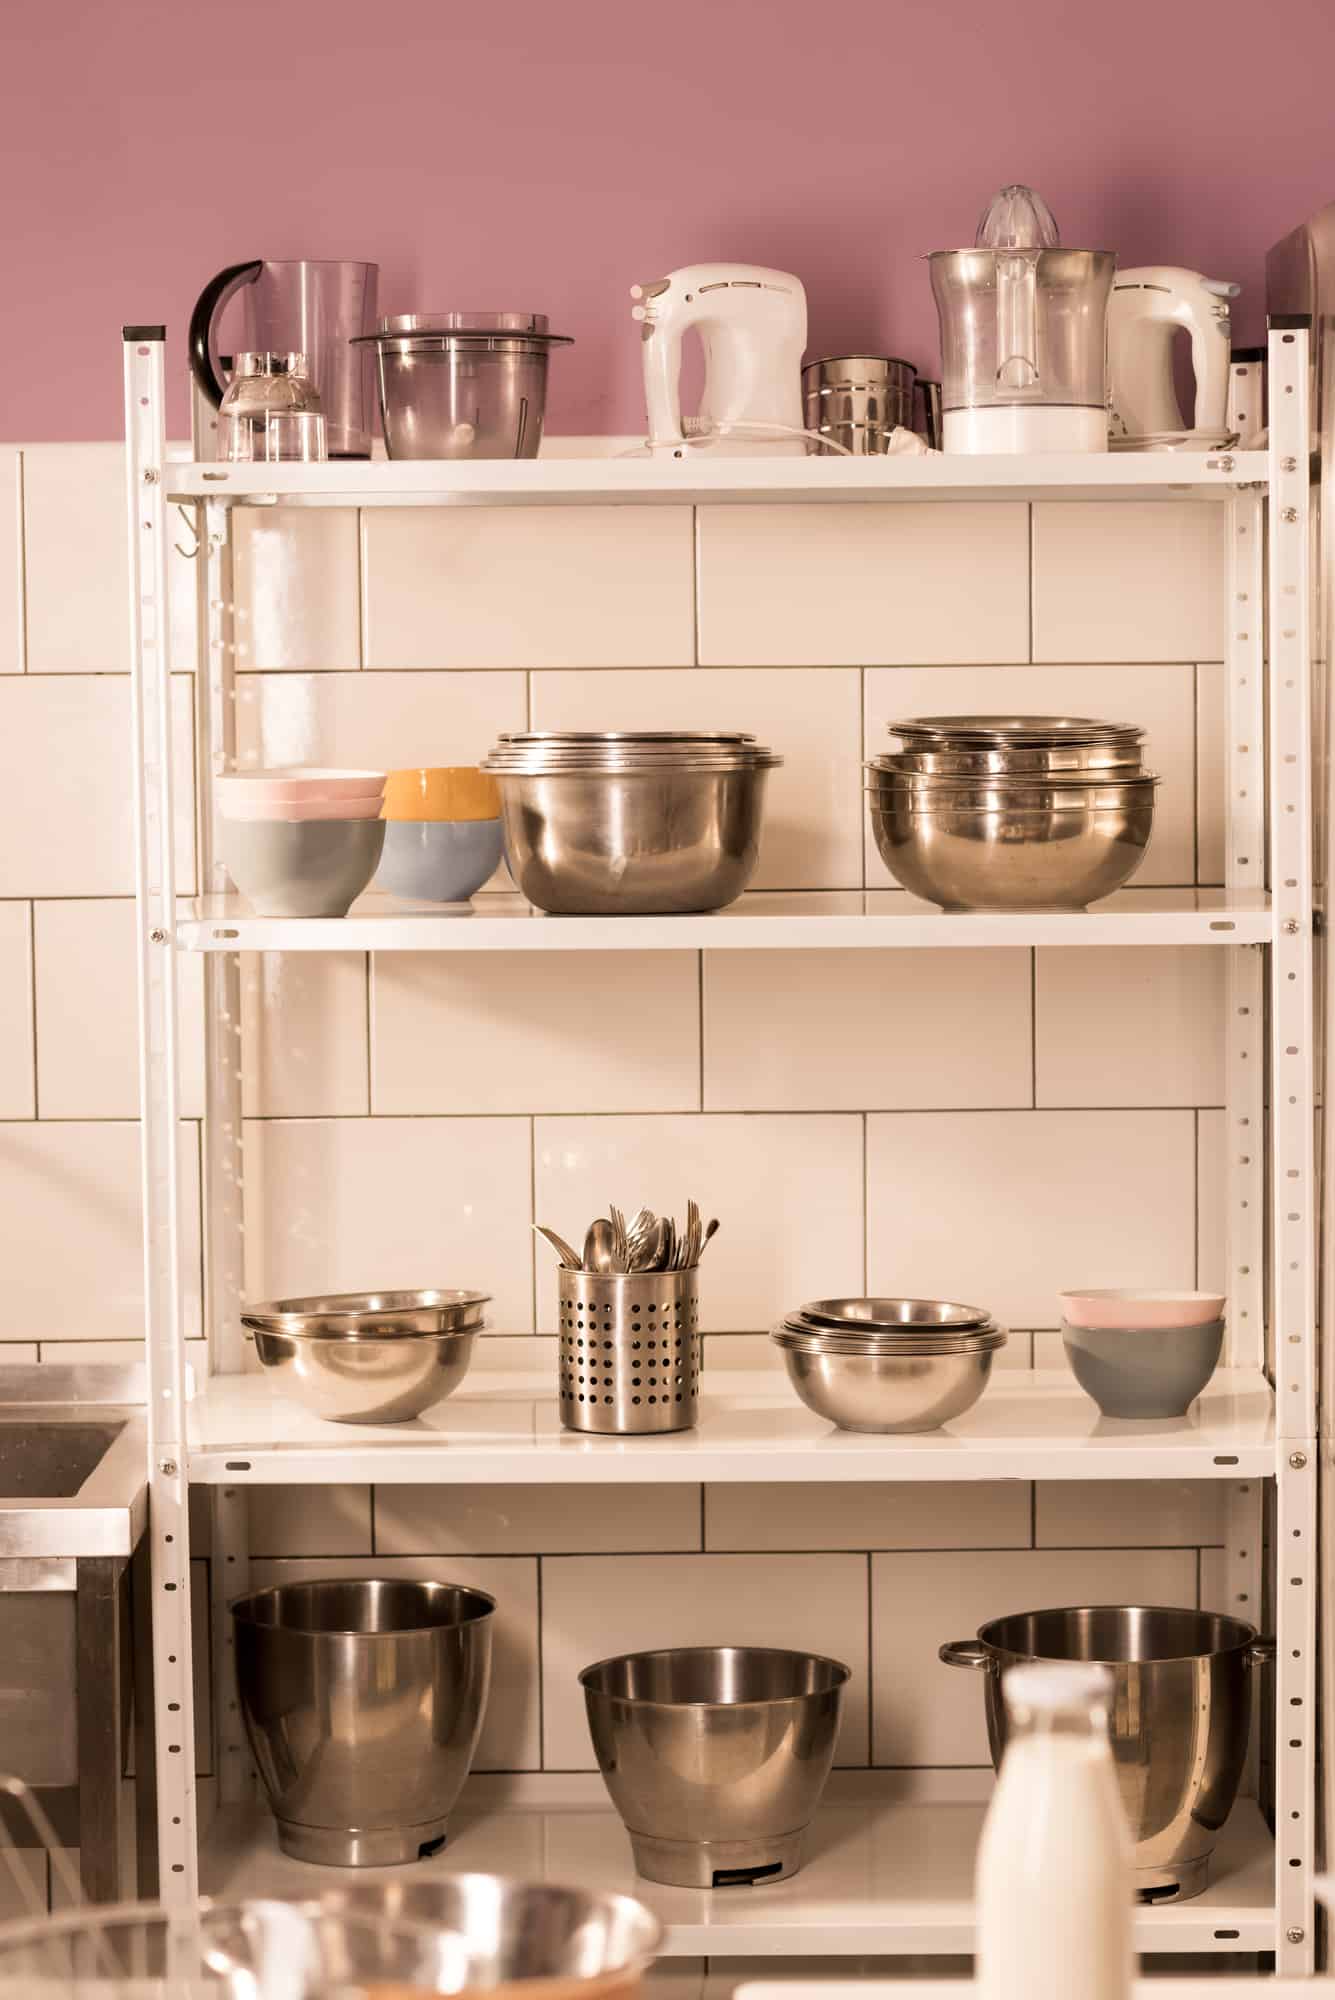 close up of various kitchen items on metal shelving